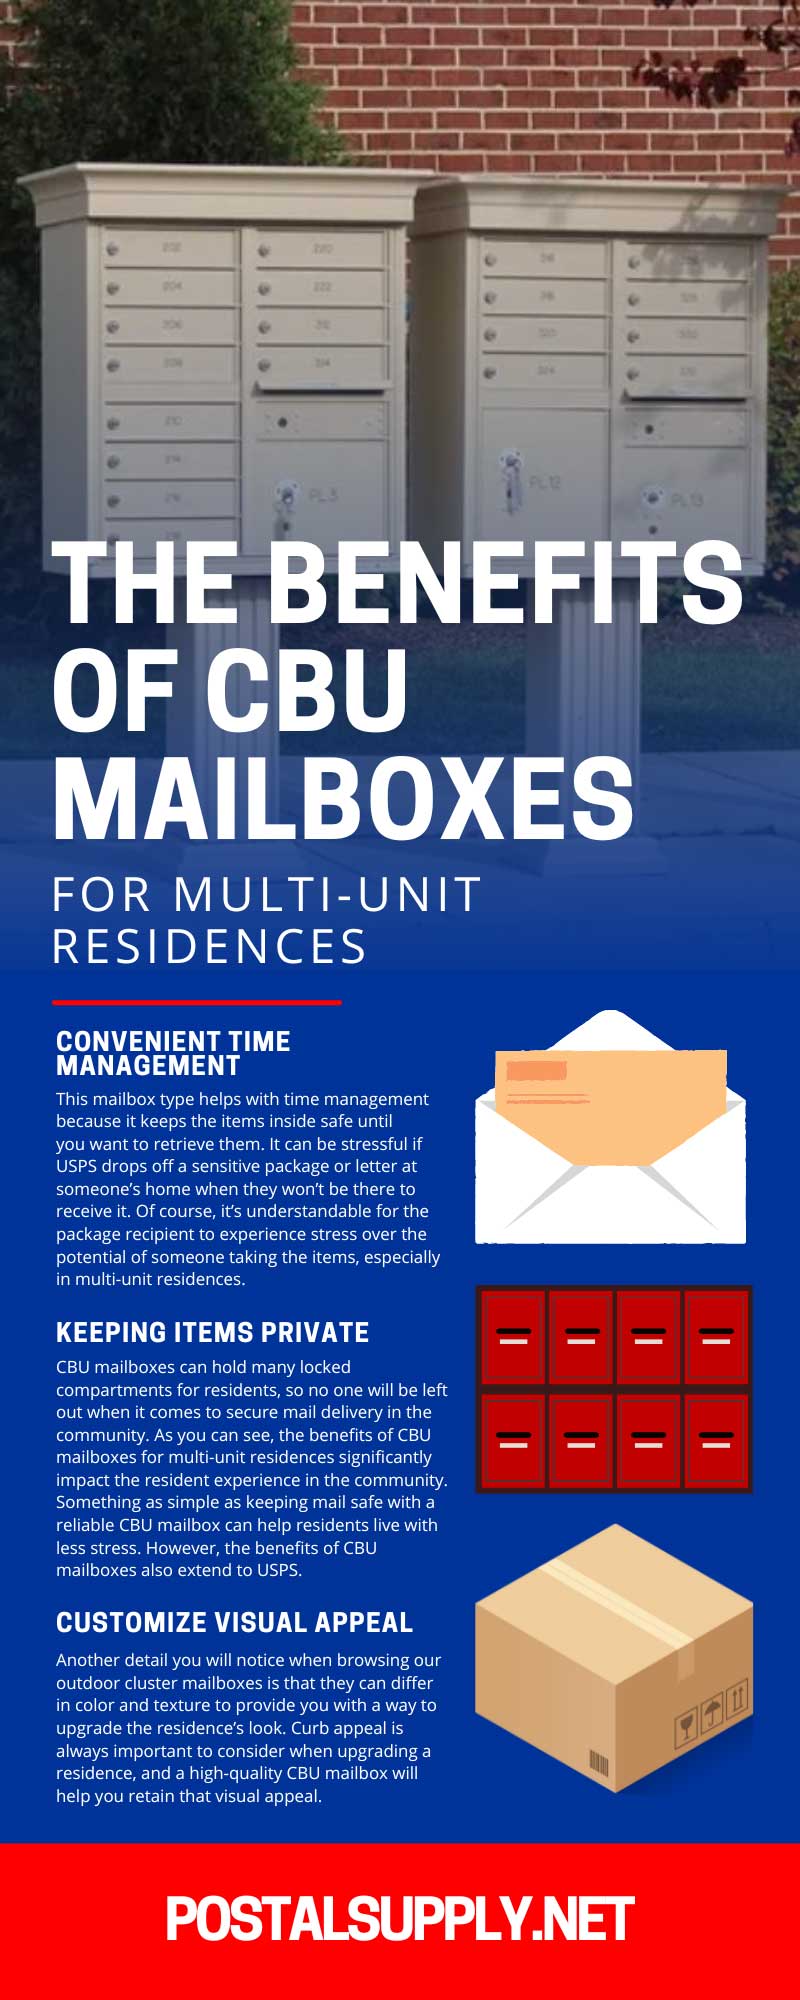 The Benefits of CBU Mailboxes for Multi-Unit Residences